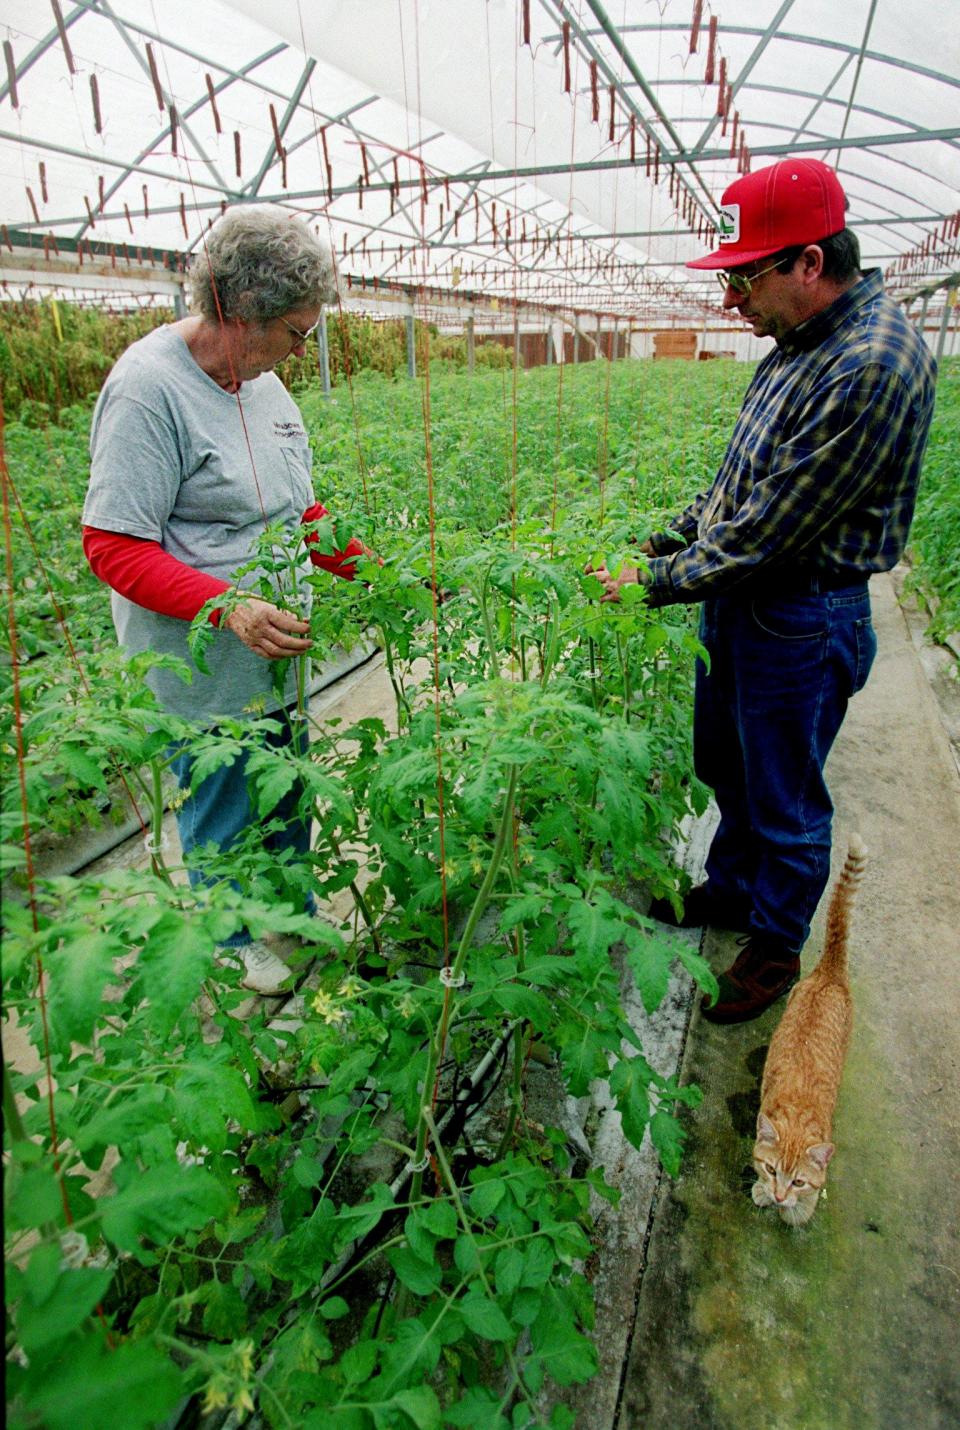 Don Meadows, right, and his mother, Anna Meadows, are clipping the vines of the spring tomato crop at Meadows Hydroponics in Tennessee in 2001.